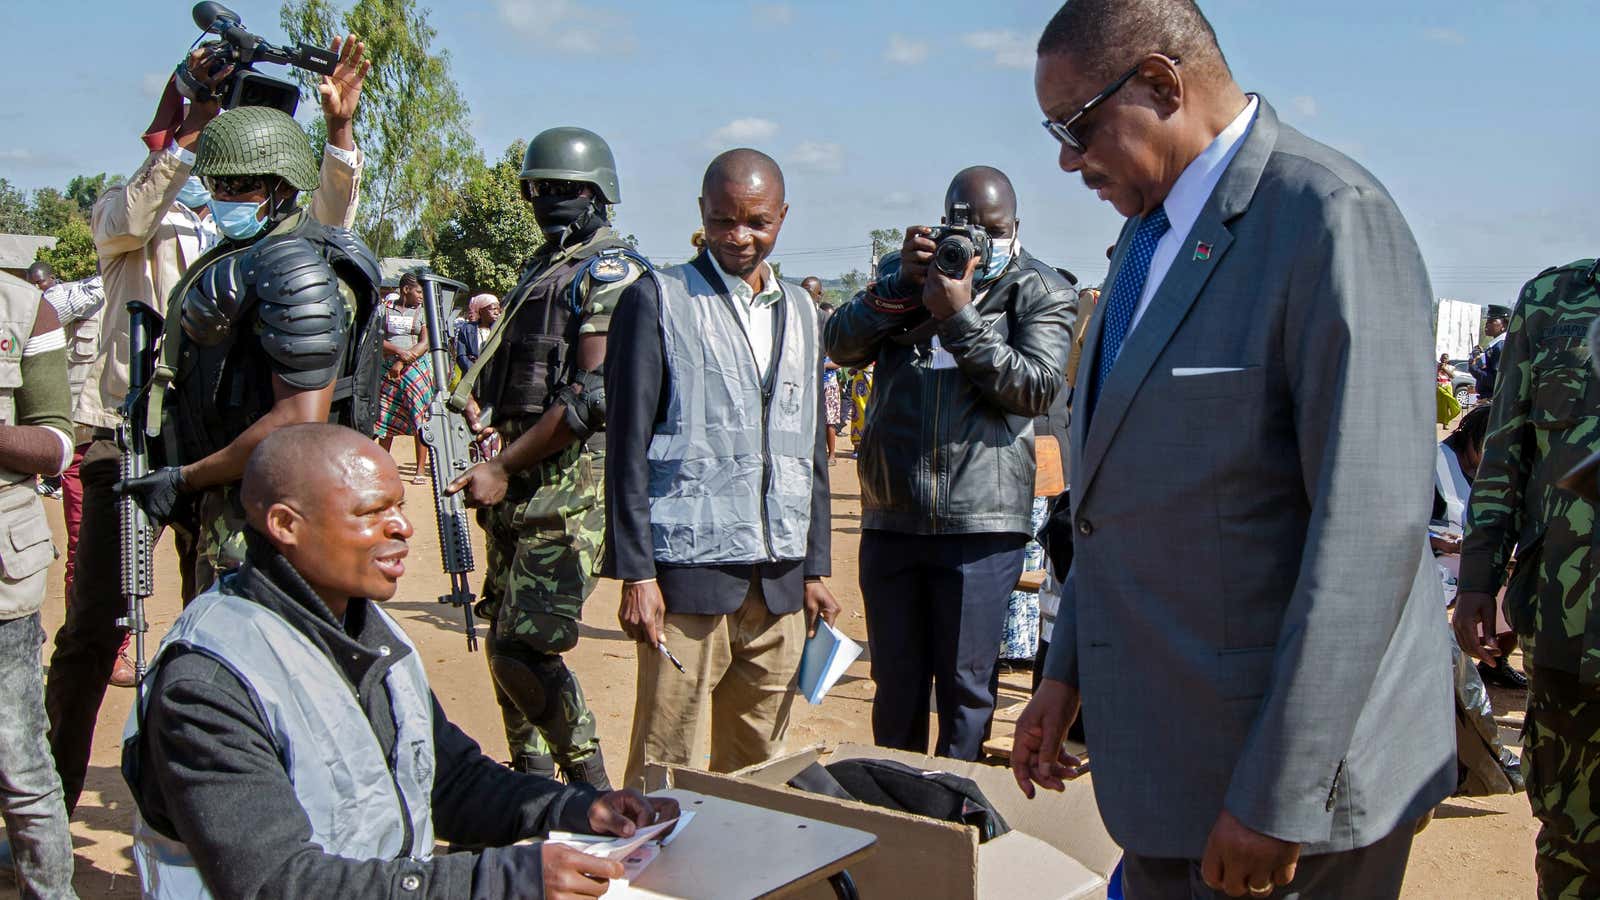 Malawi’s President Peter Mutharika arrives to vote in a re-run of a discredited presidential election in Thyolo, Malawi, June 23, 2020.